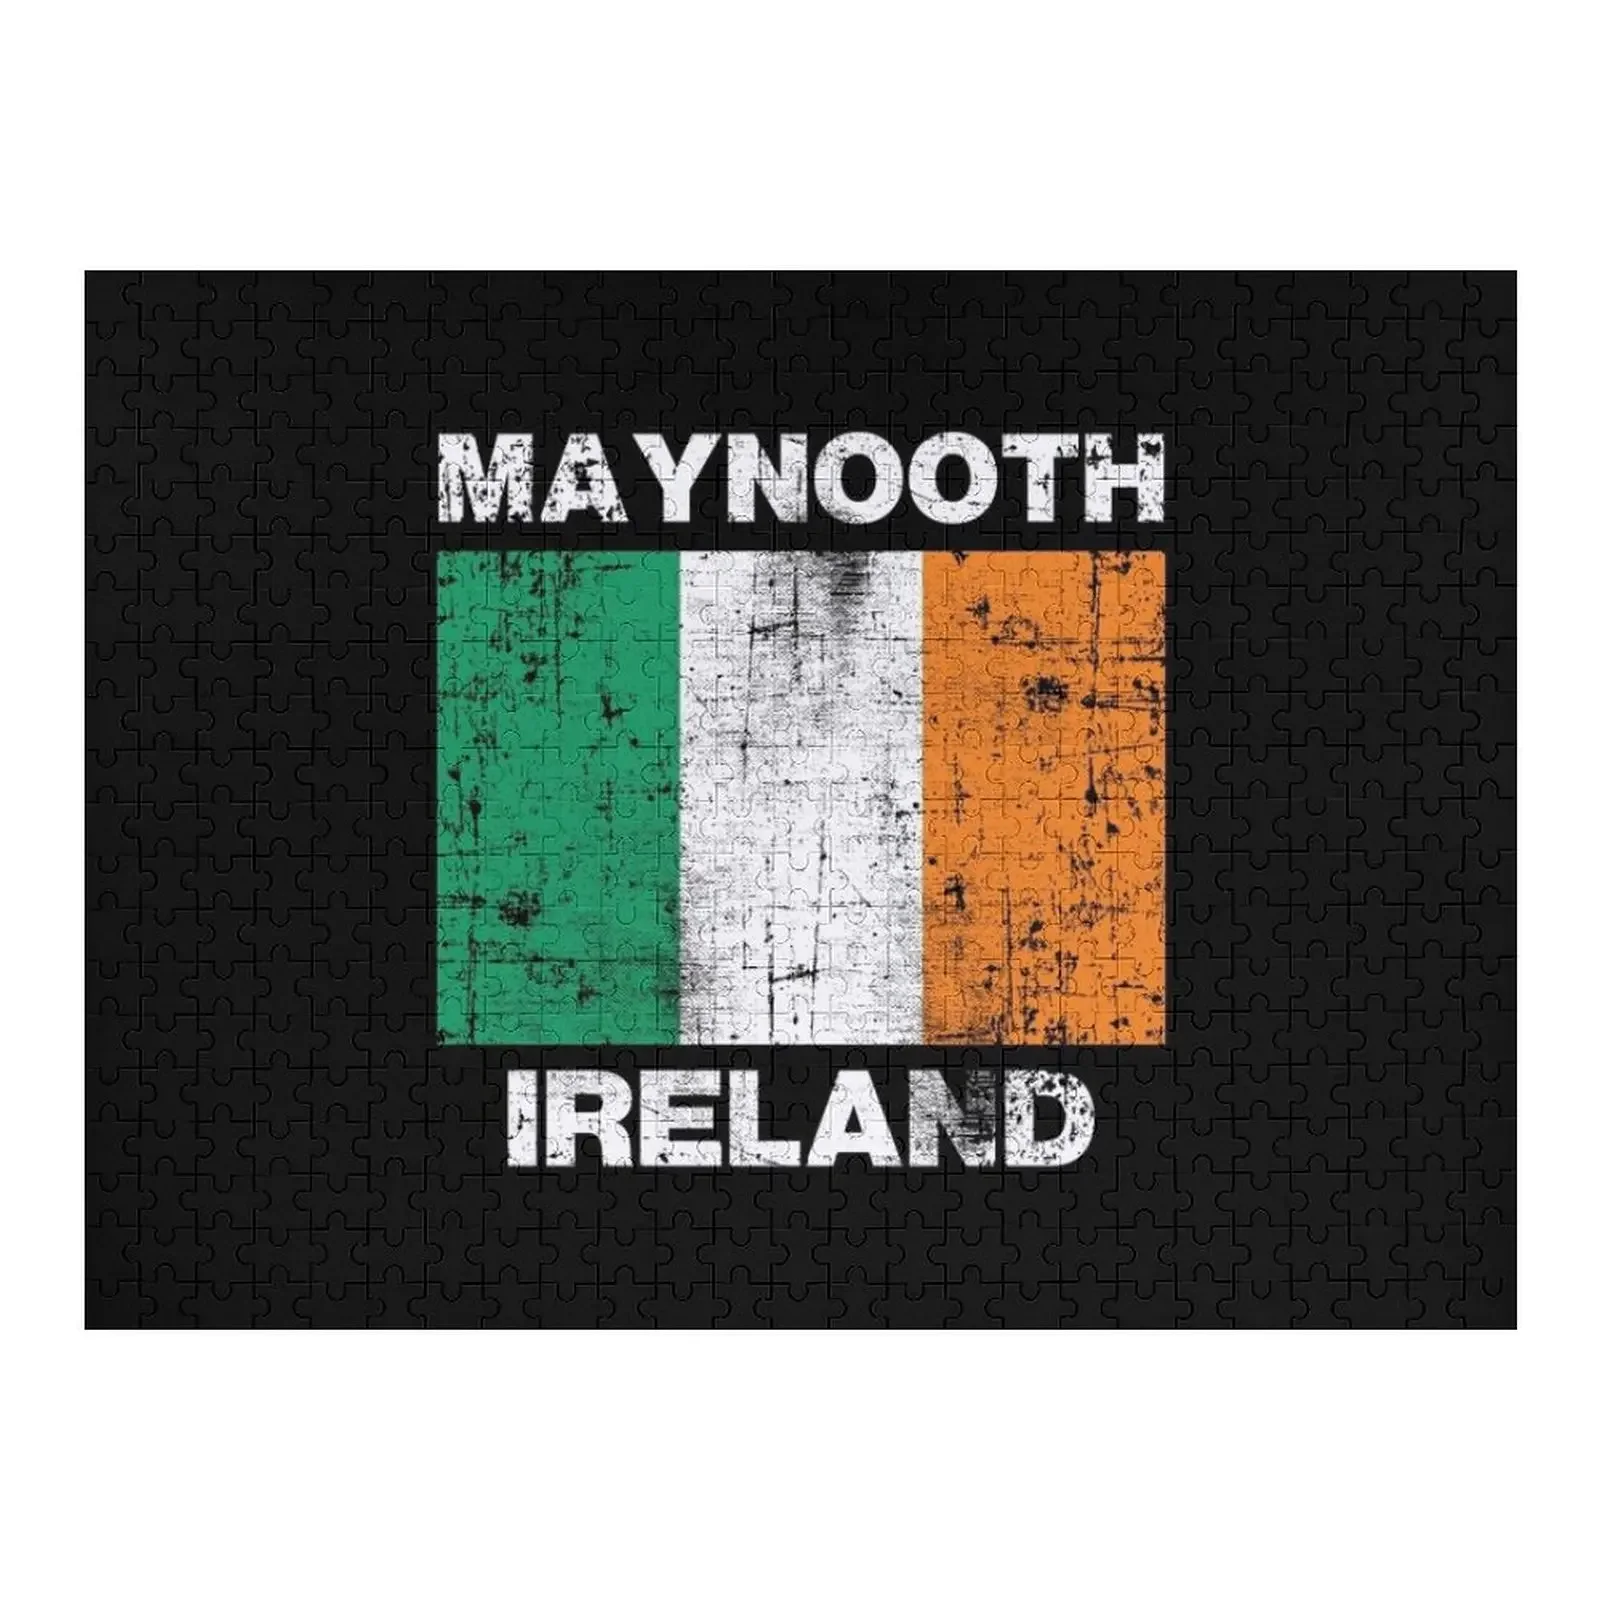 Classic Maynooth Ireland - Travel Souvenir Jigsaw Puzzle Custom Child Baby Toy Personalized Photo Gift Custom With Photo Puzzle manufacturers spot wholesale germany austria switzerland travel souvenir gift cuckoo clock